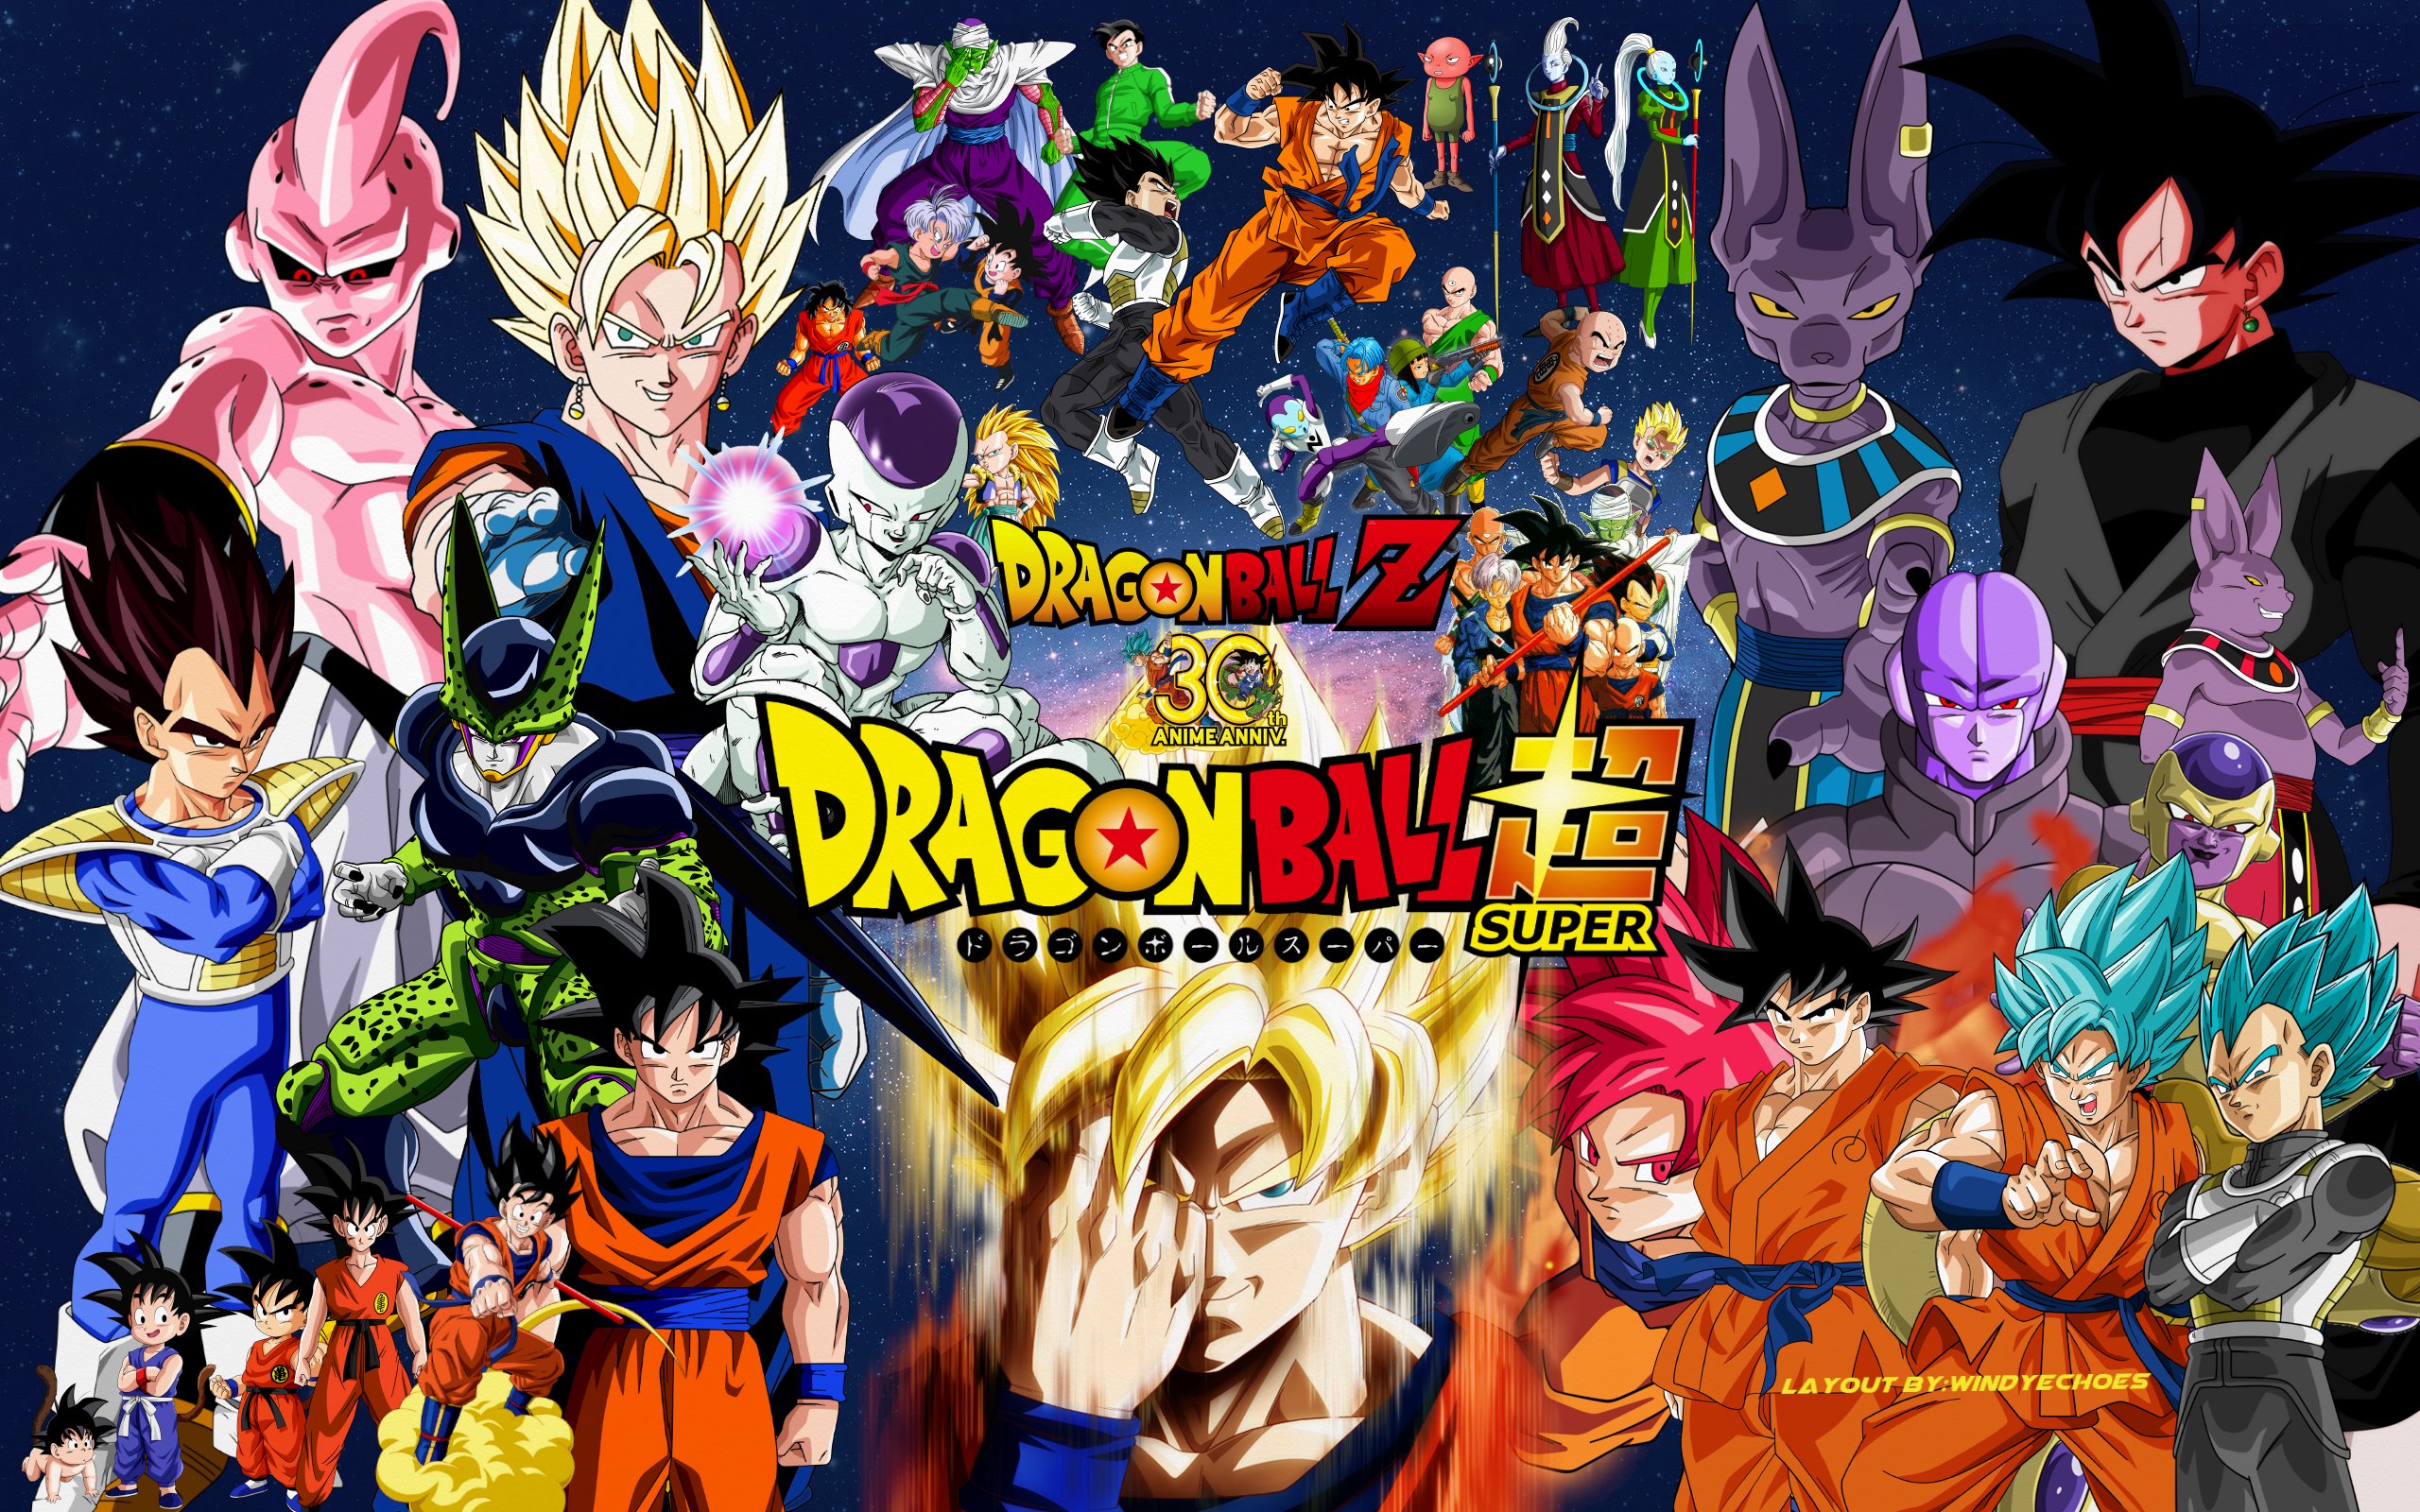 Dragon Ball Z And Super Wallpaper 1 by WindyEchoes on DeviantArt